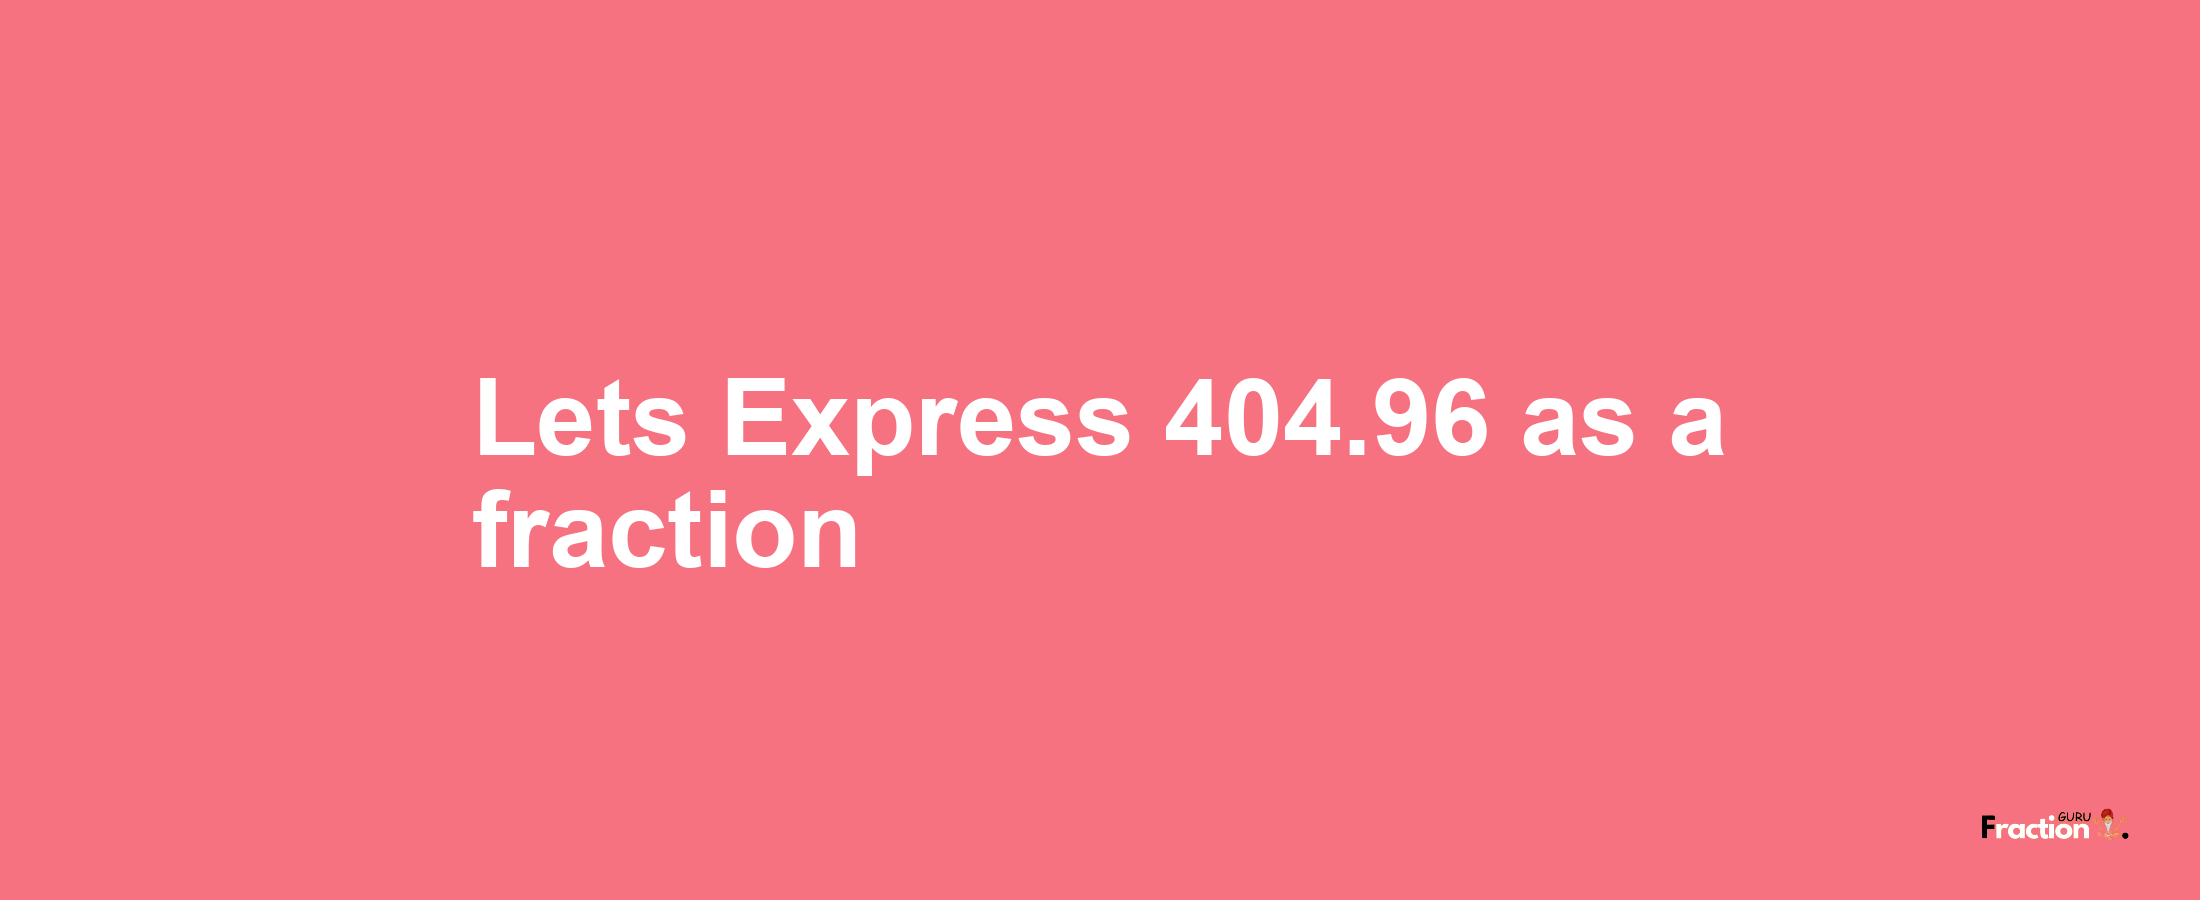 Lets Express 404.96 as afraction